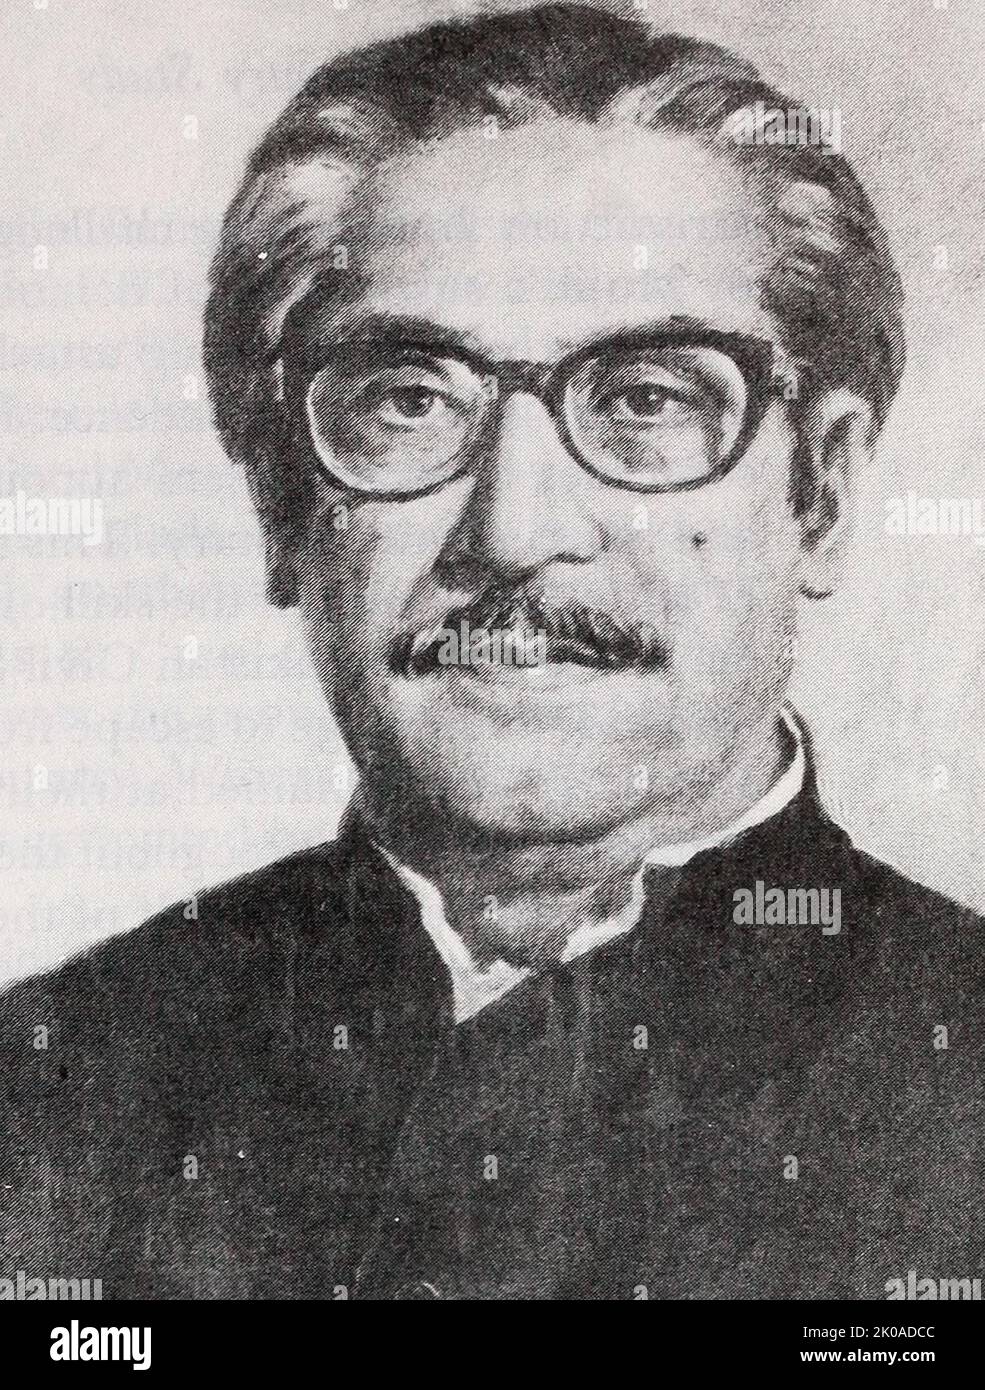 Sheikh Mujibur Rahman (1920 - 1975), Bangladeshi politician, statesman and Founding Father of Bangladesh who served as the first President and later as the Prime Minister of Bangladesh from April 1971 until his assassination in August 1975. Mujib is credited with leading the successful campaign for Bangladesh's independence from Pakistan Stock Photo